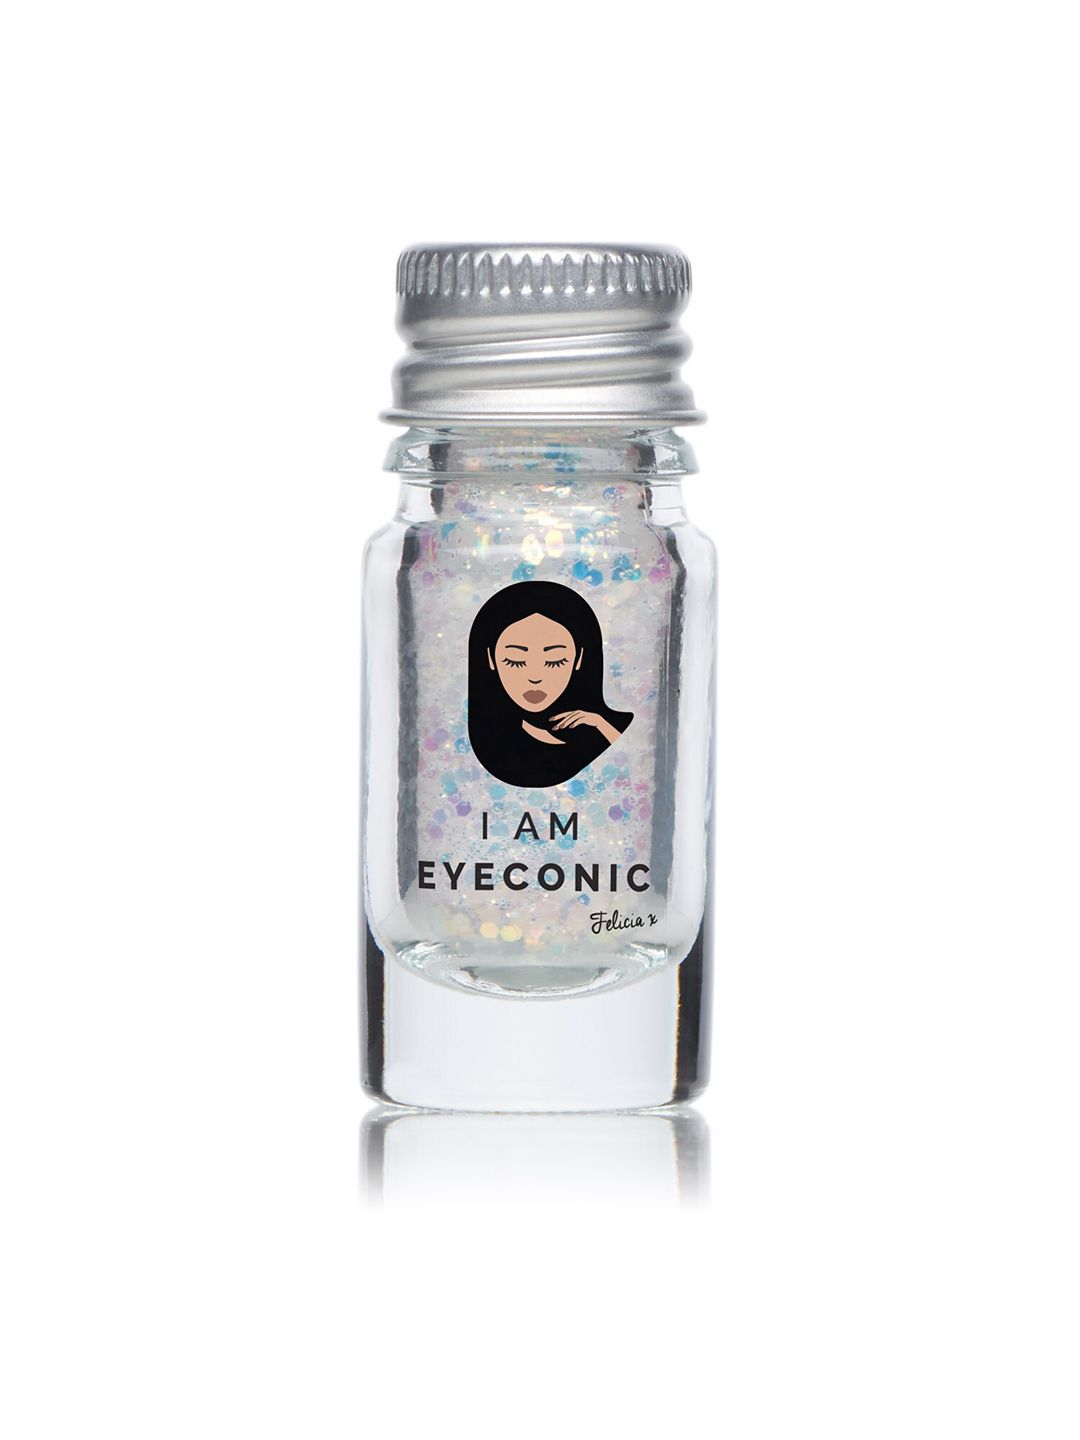 I AM EYECONIC 3D Cosmetic Glitters Eyeshadow - Spotlight Price in India